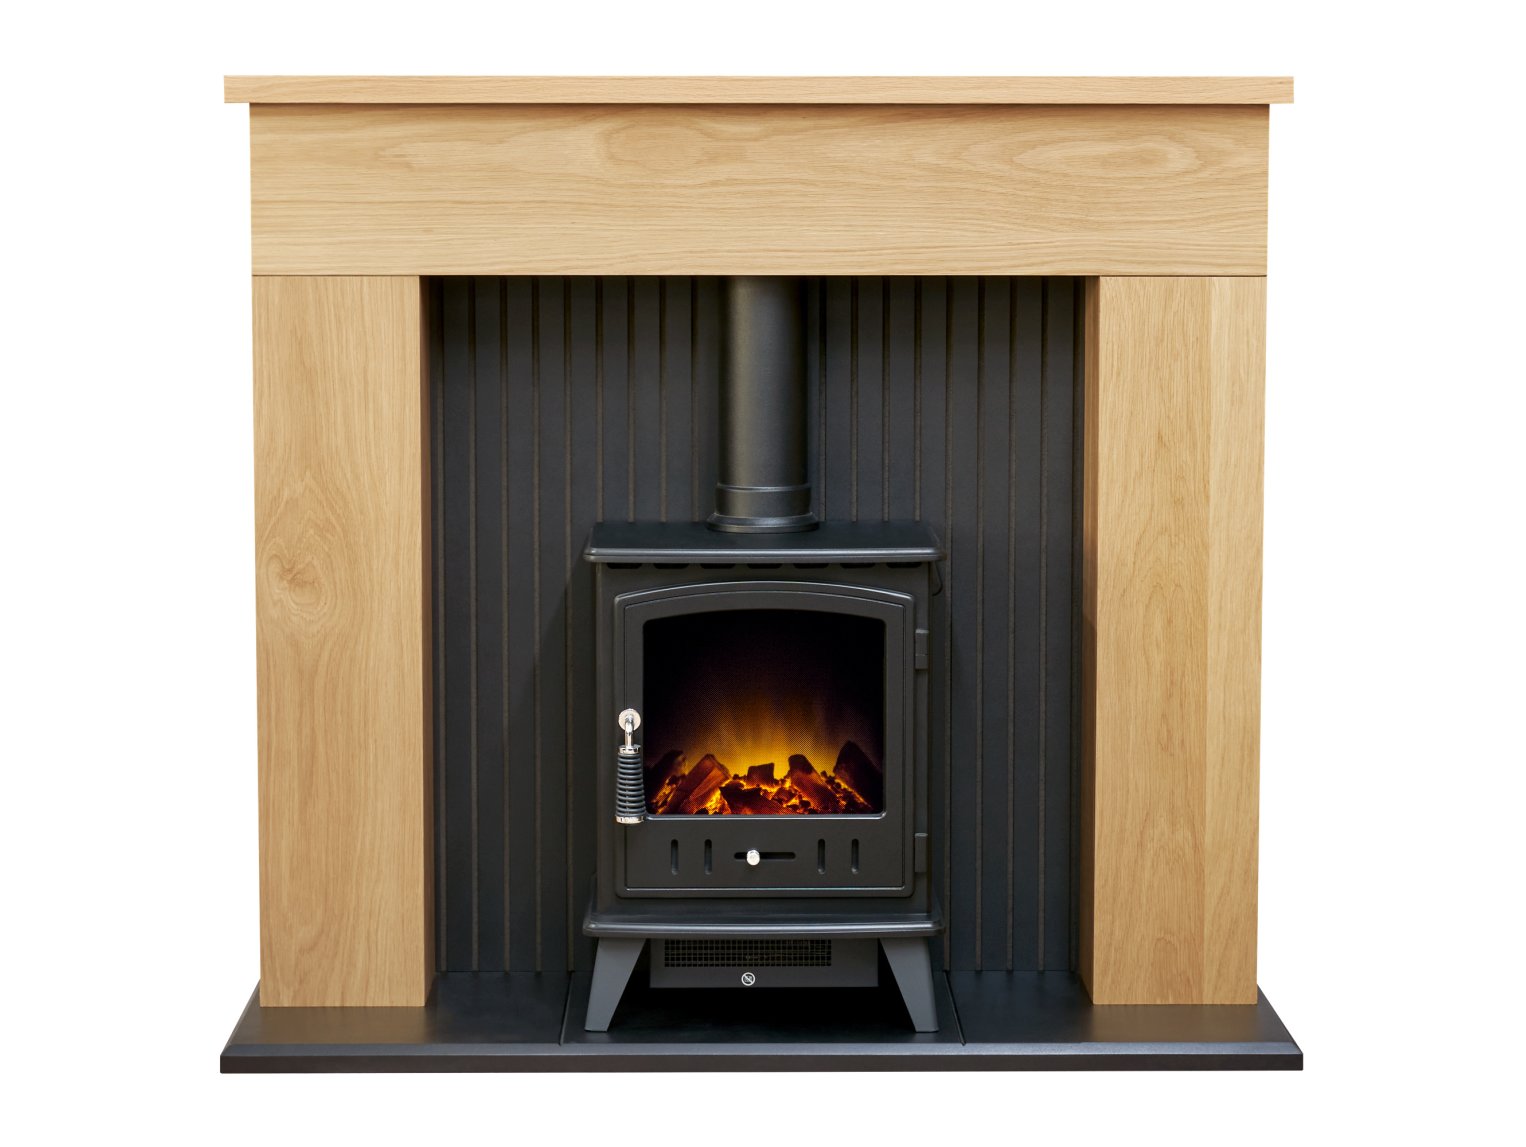 Adam Innsbruck Stove Fireplace in Oak with Aviemore Electric Stove in Black, 48 Inch